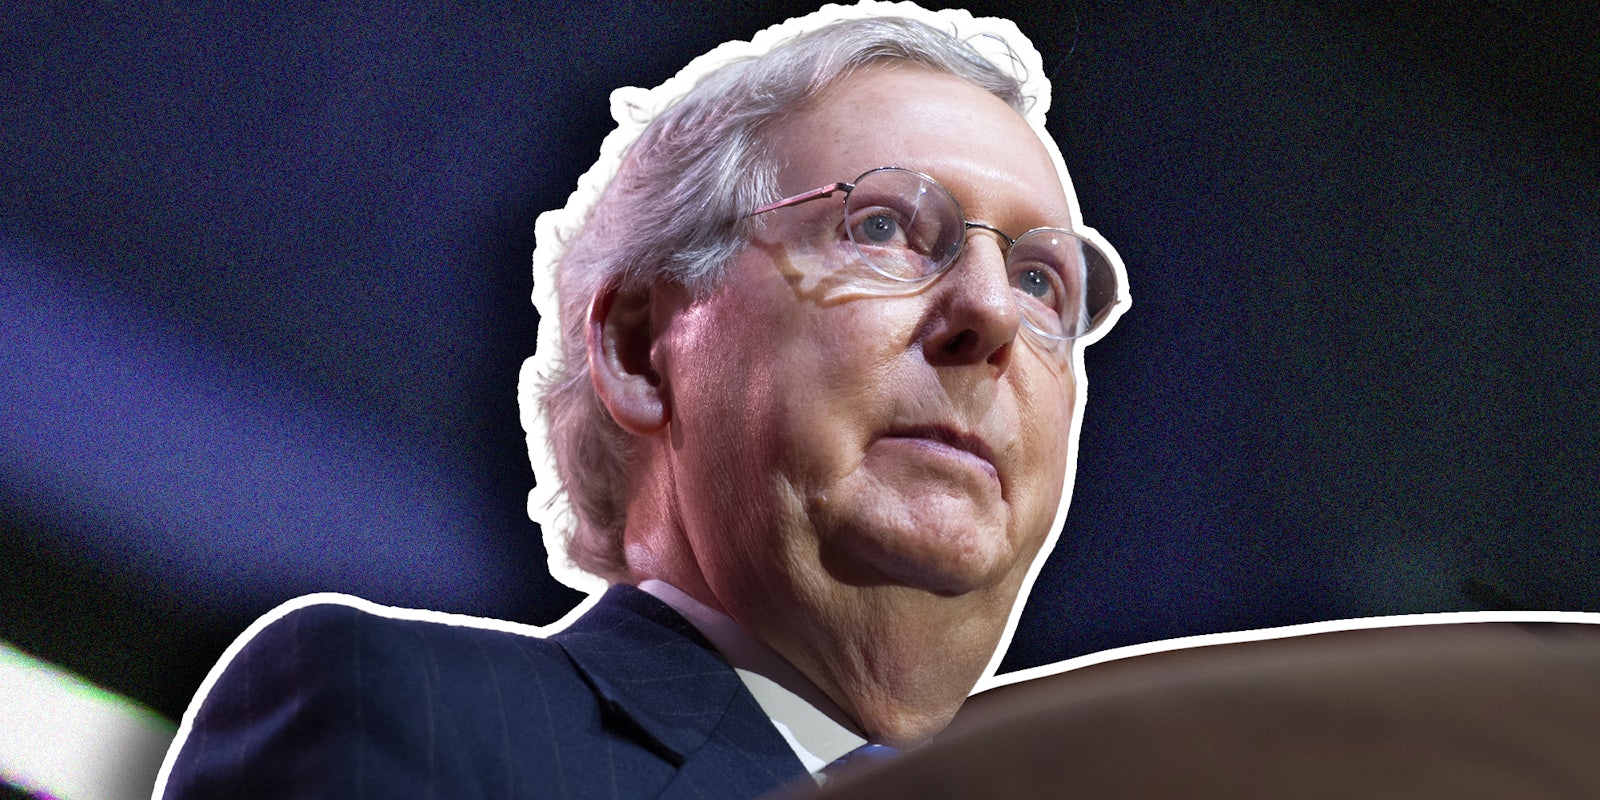 NATIONAL HARBOR, MD - MARCH 6, 2014: Senator Mitch McConnell (R-KY) speaks at the Conservative Political Action Conference (CPAC).